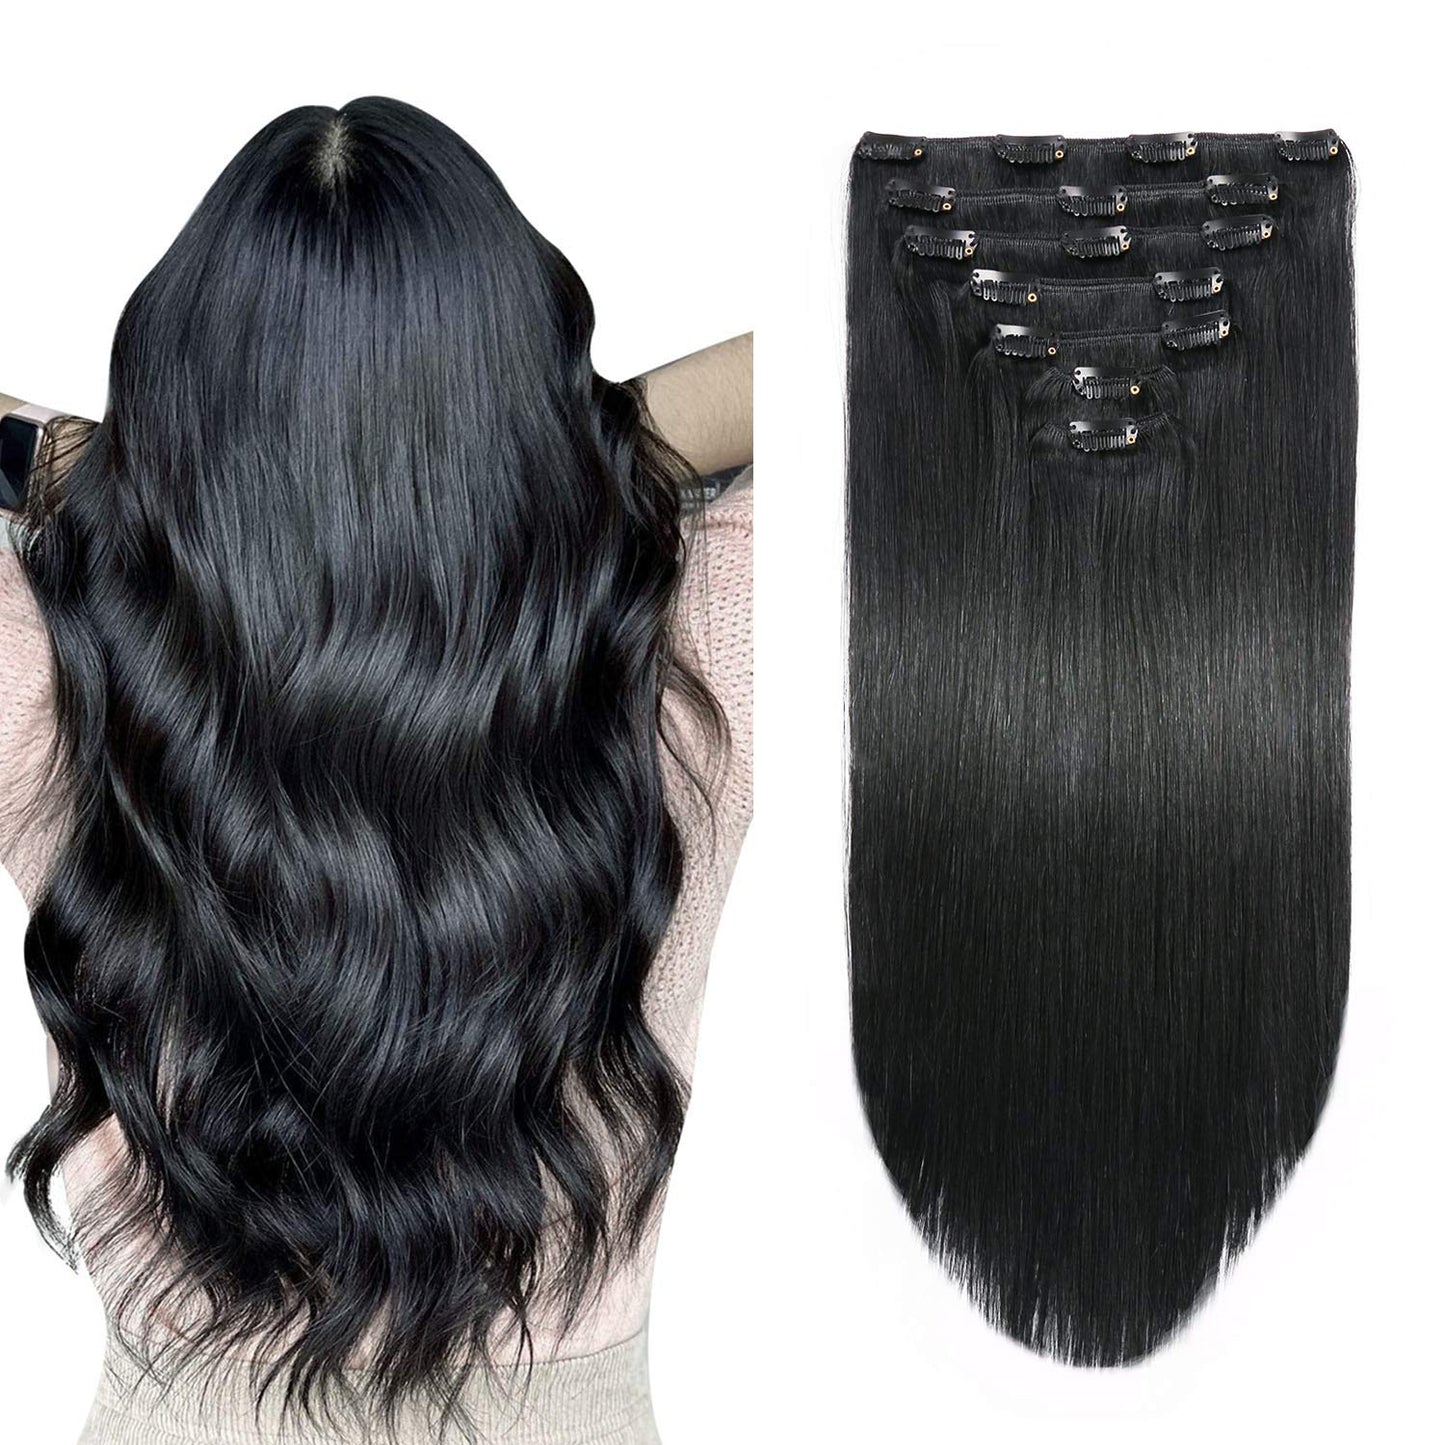 Clip in Hair Extensions 120g 7pcs Remy Human Hair Extensions